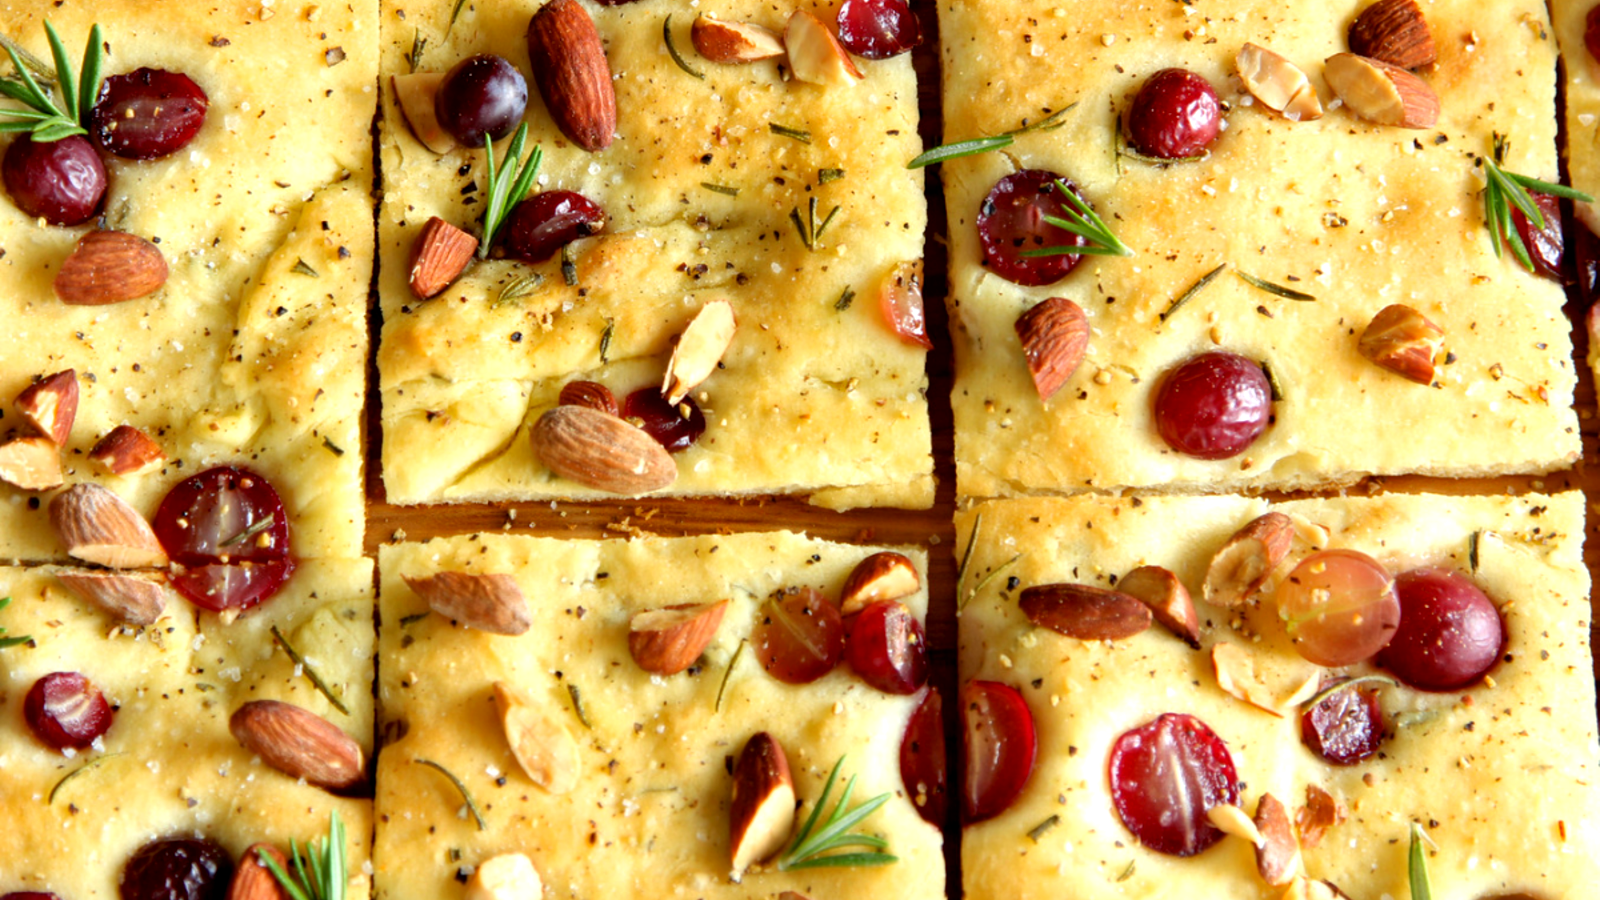 Image of Roasted Almond Focaccia With Grapes And Rosemary